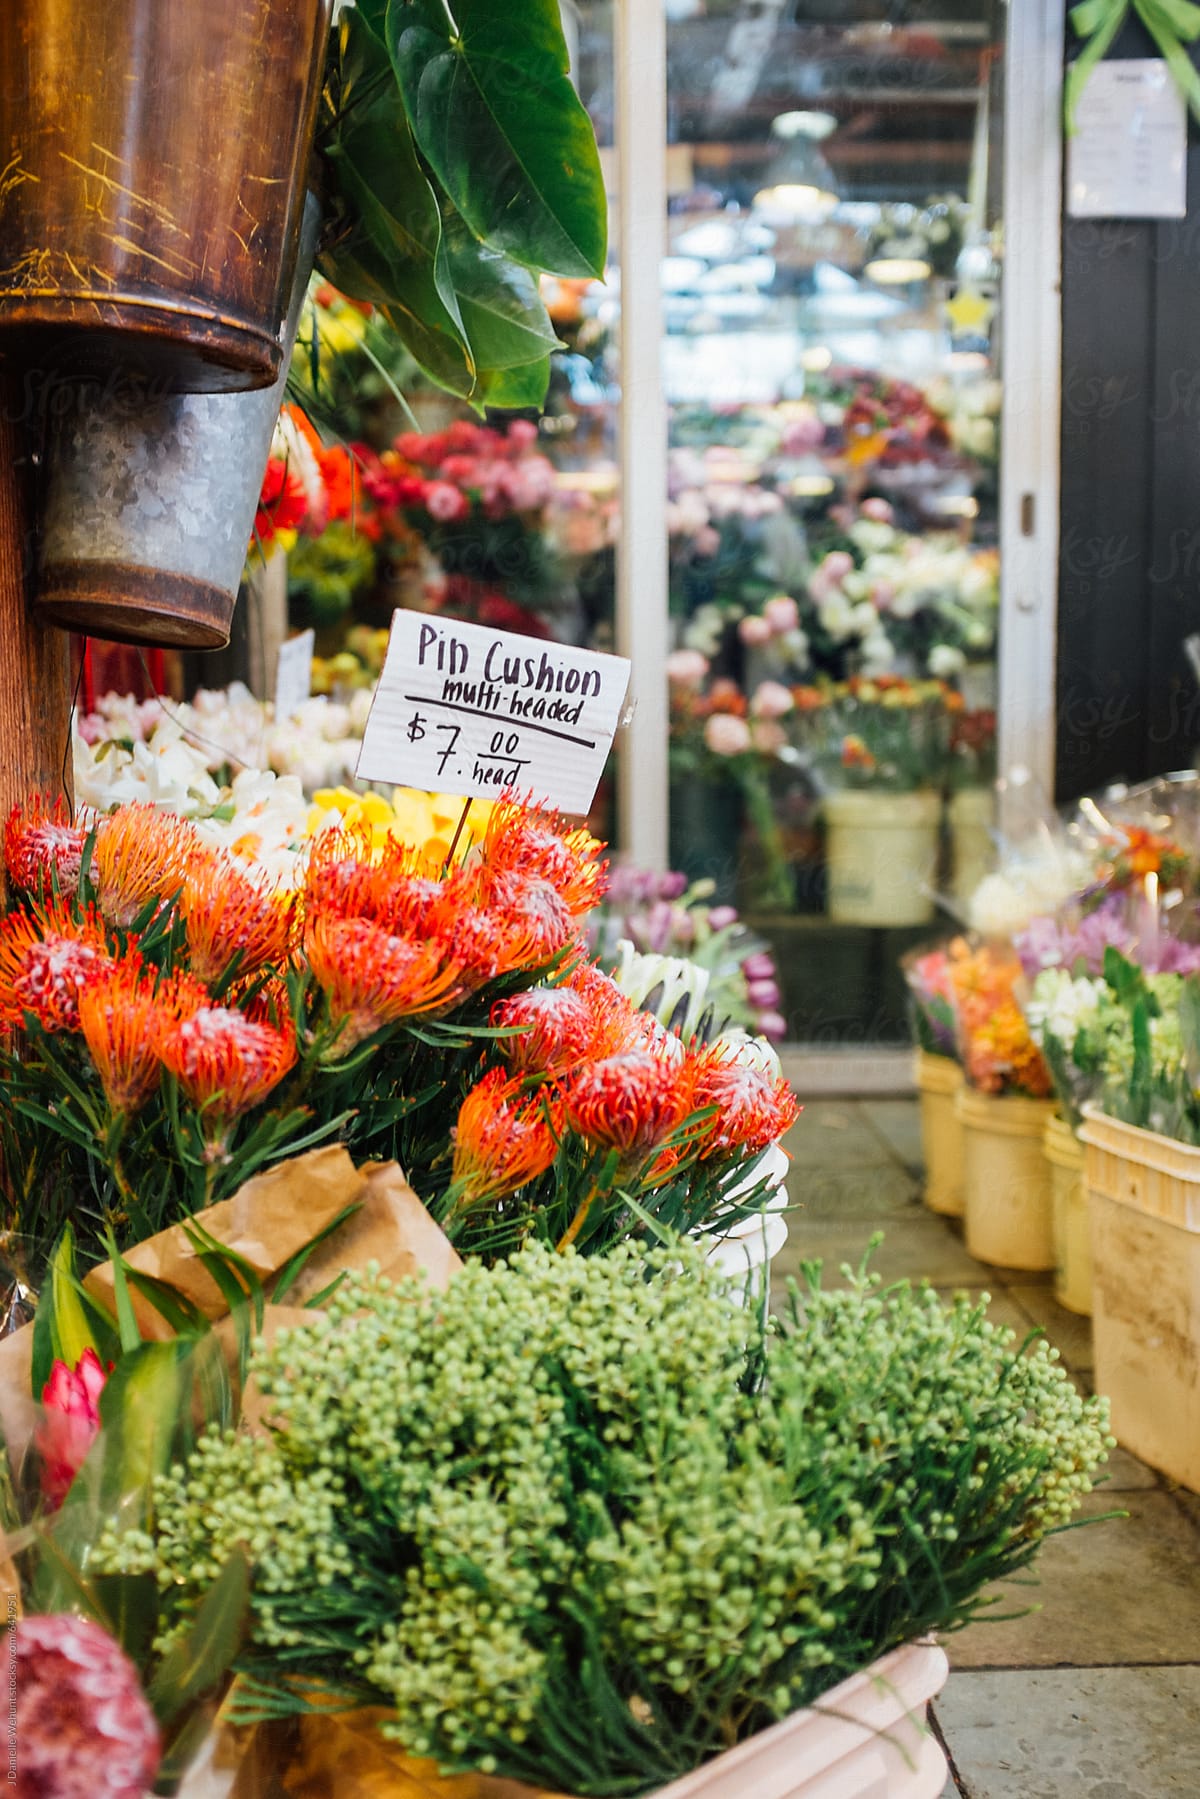 Pin Cushion Flowers For Sale In An Outdoor Market Area By J Danielle Wehunt Stocksy United